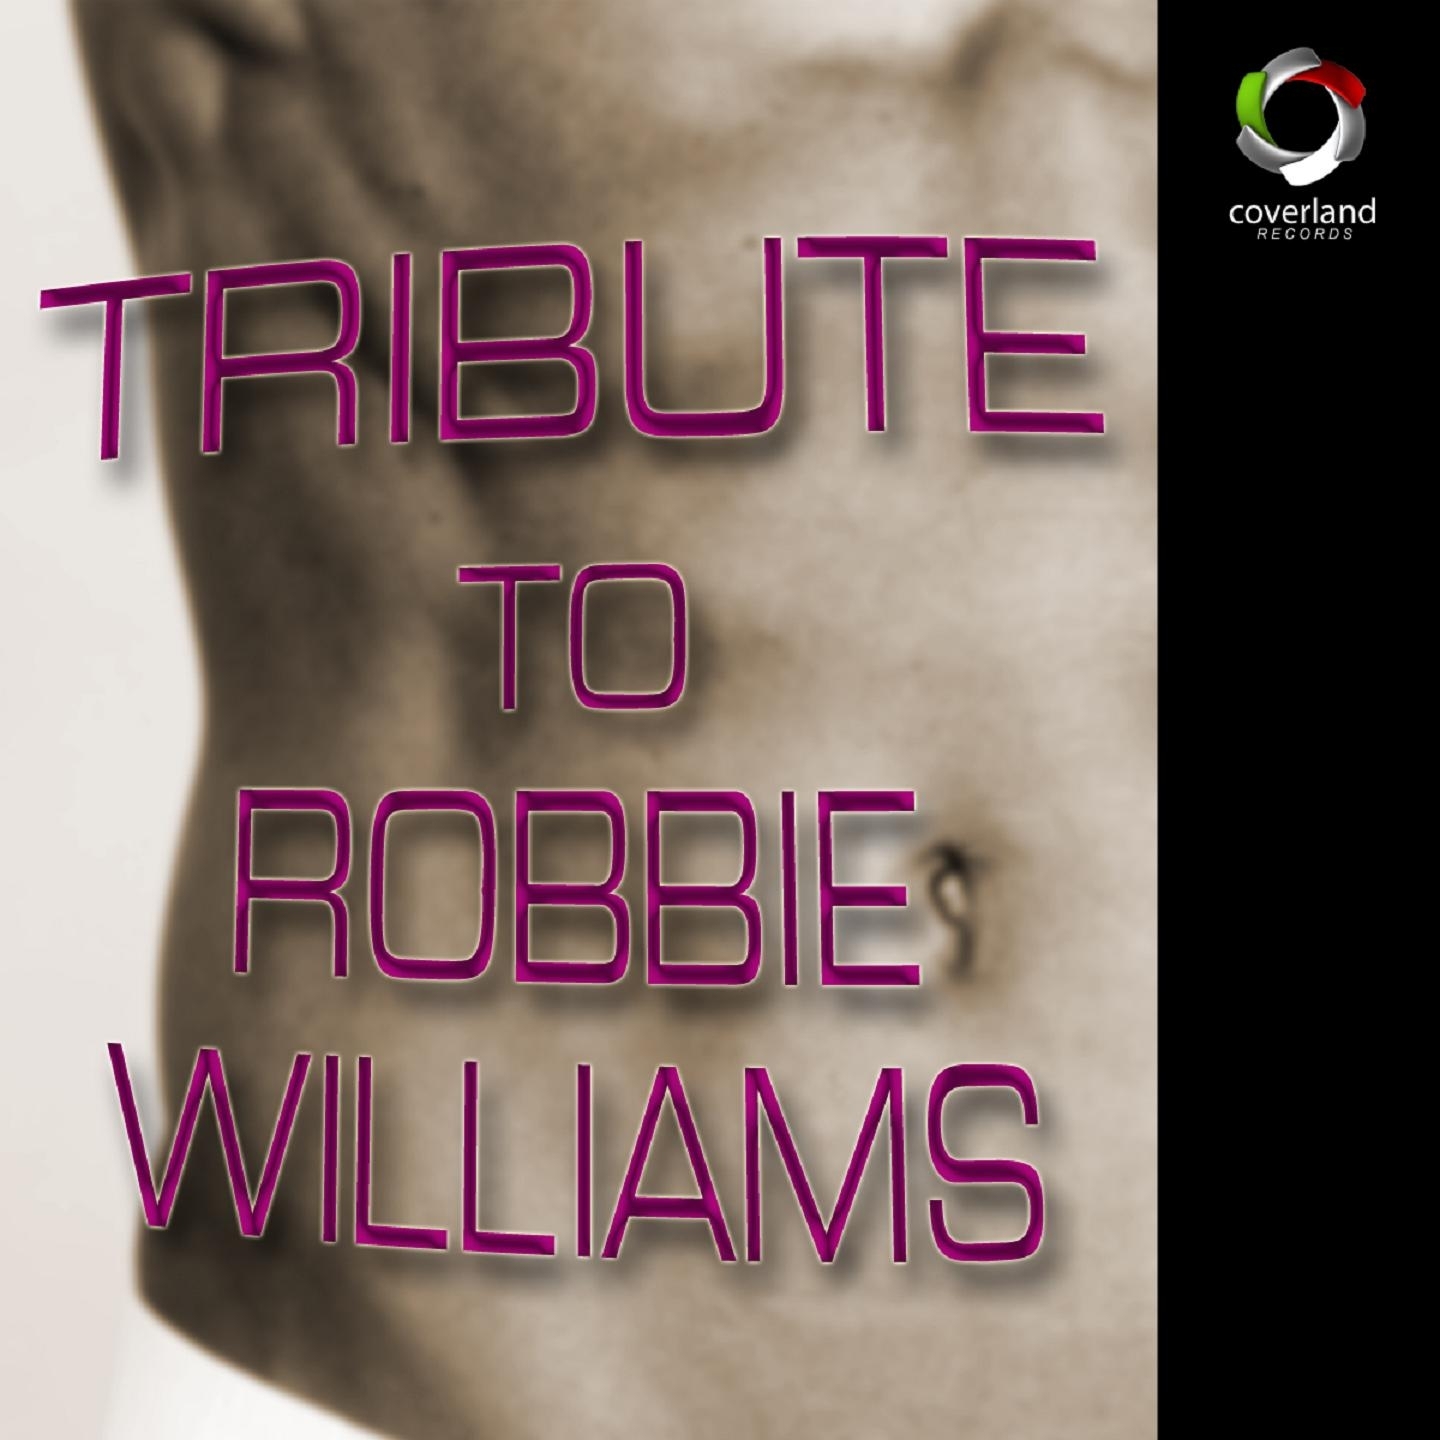 A Tribute to Robbie Williams